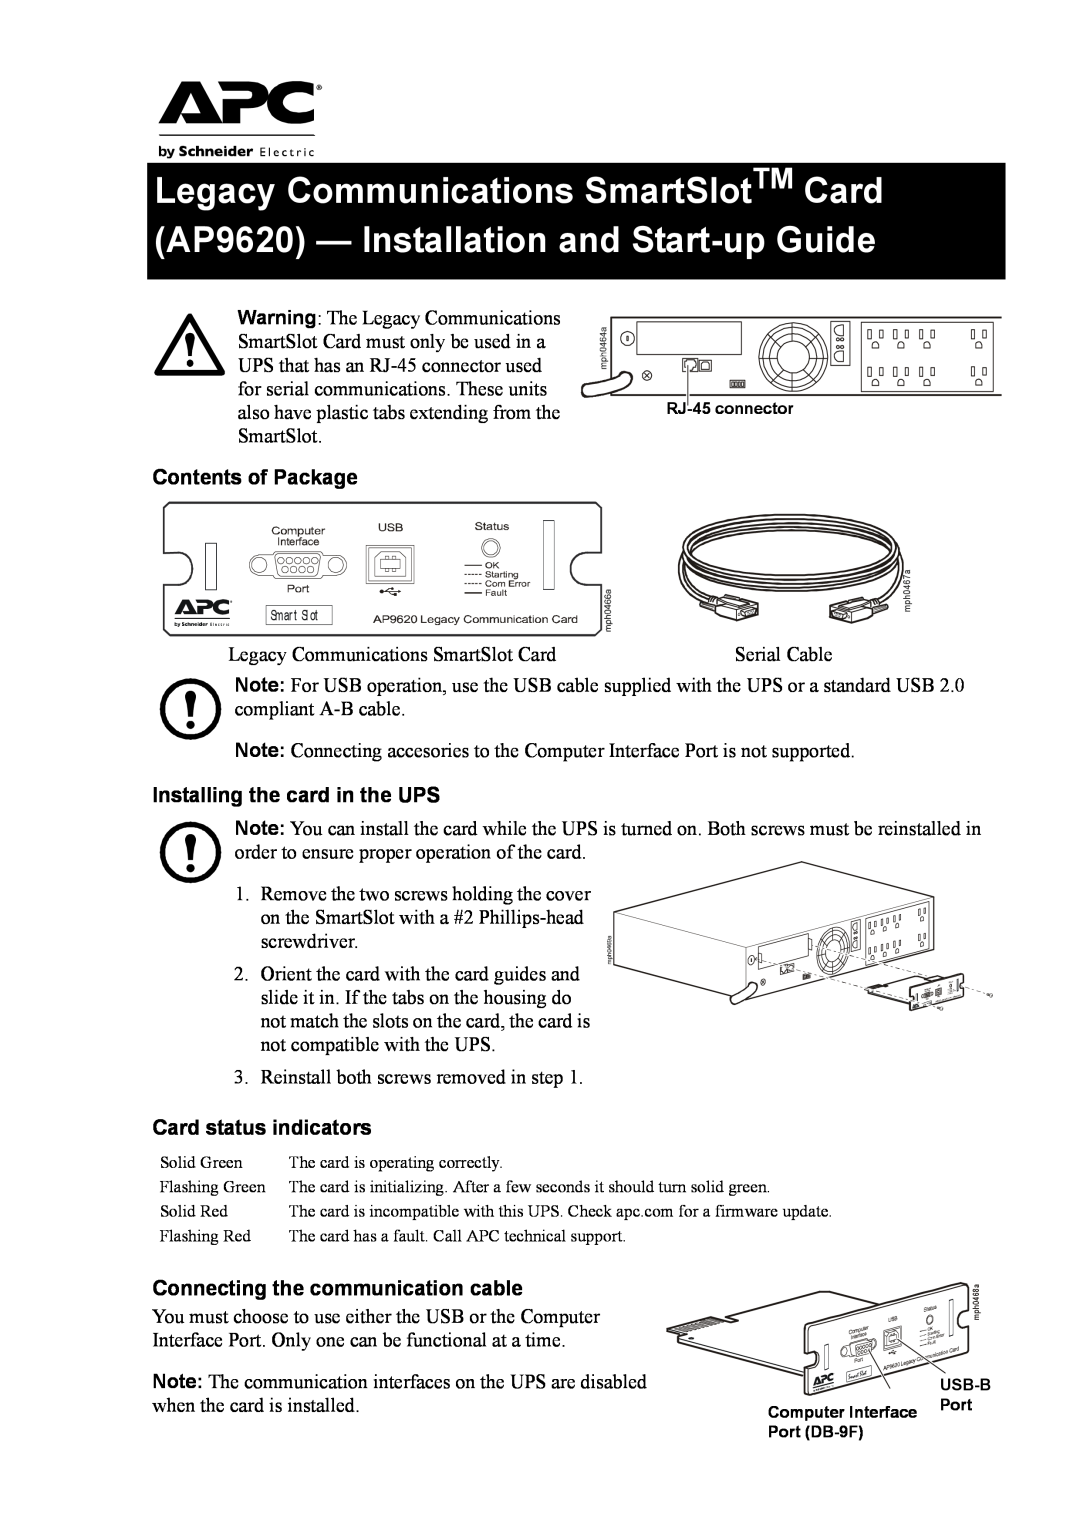 APC AP9620 manual Contents of Package, Installing the card in the UPS, Card status indicators 